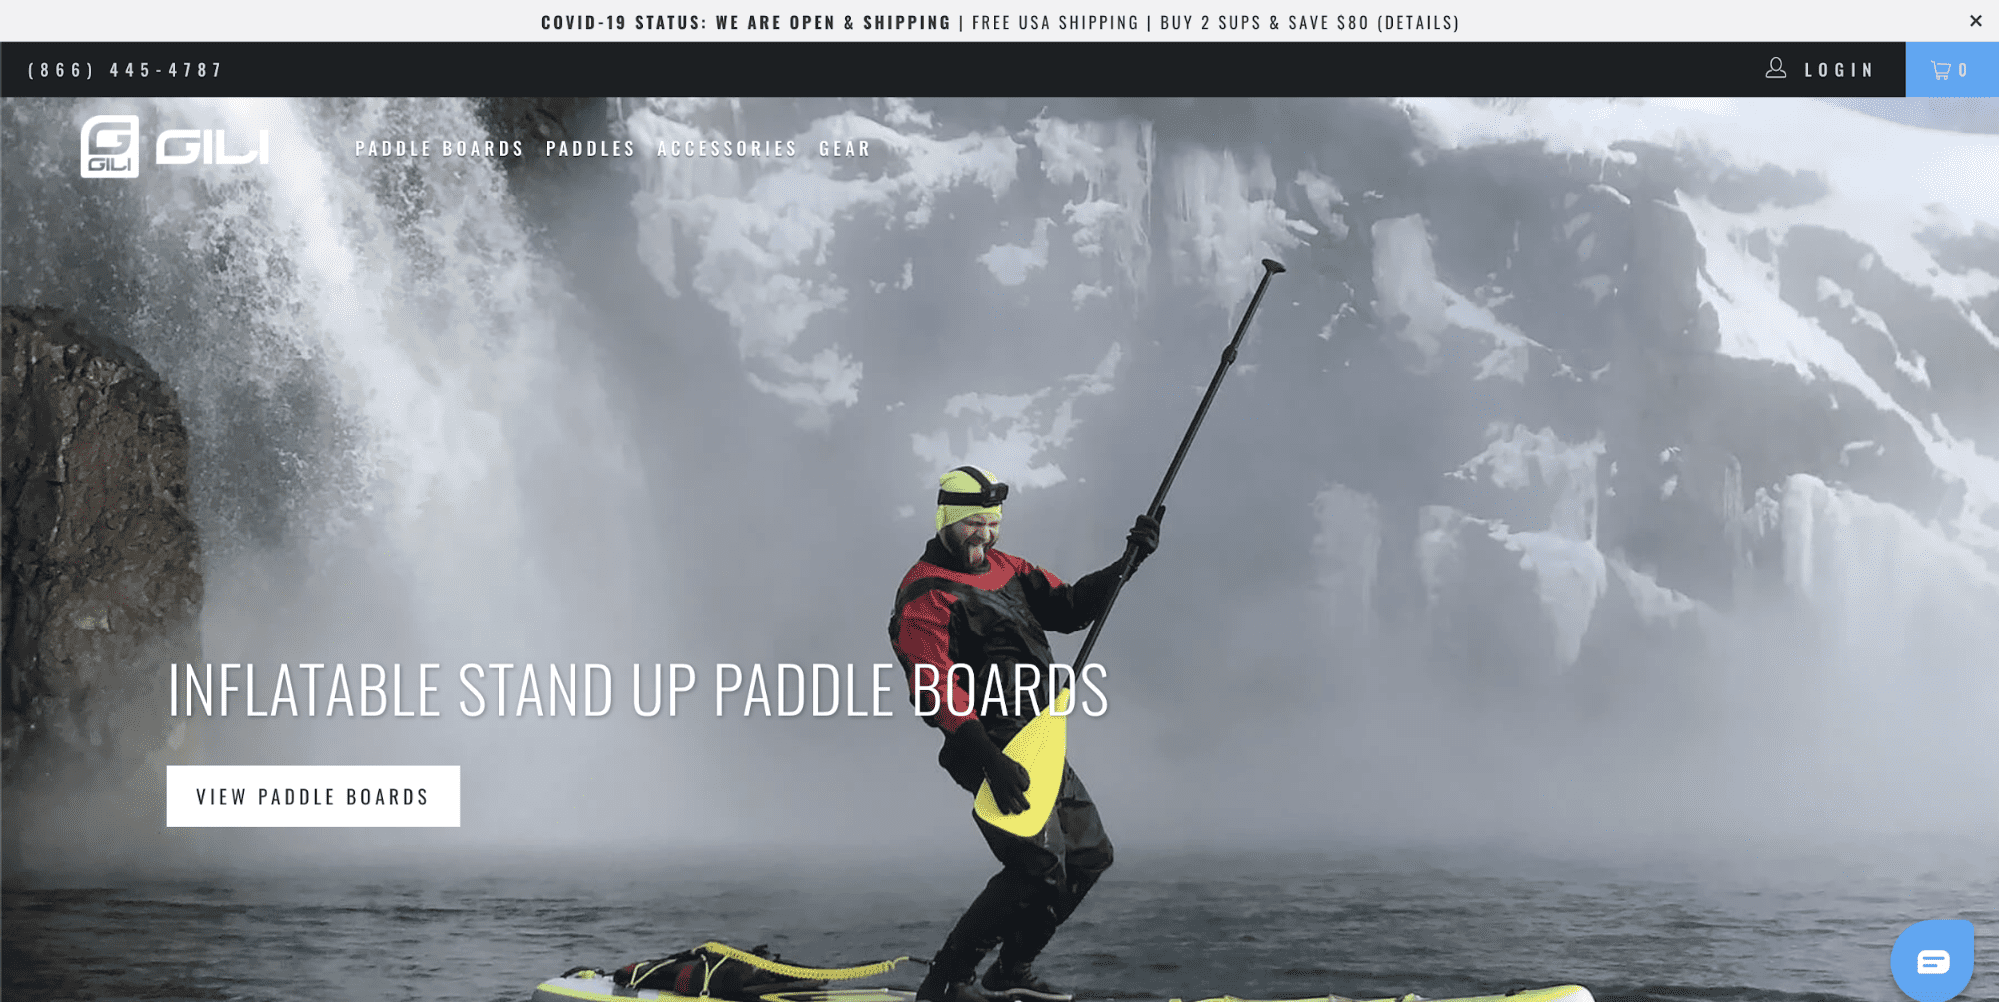 Gili Sports Stand Up Paddle Boards